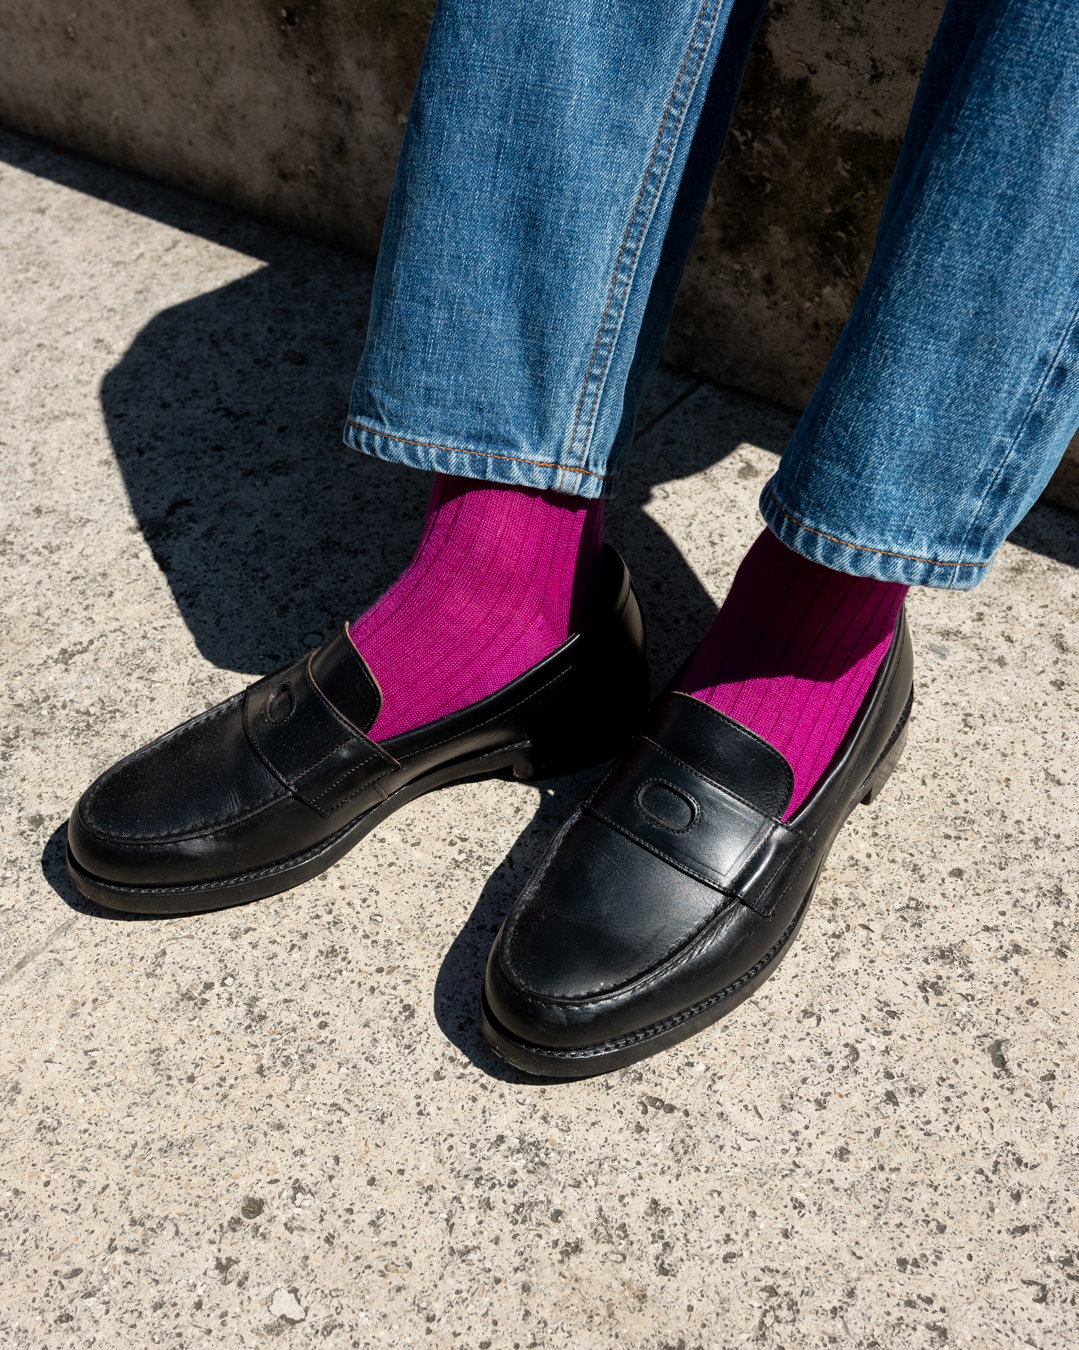 New Suede Shoes: The Canal Loafer – Drakes US